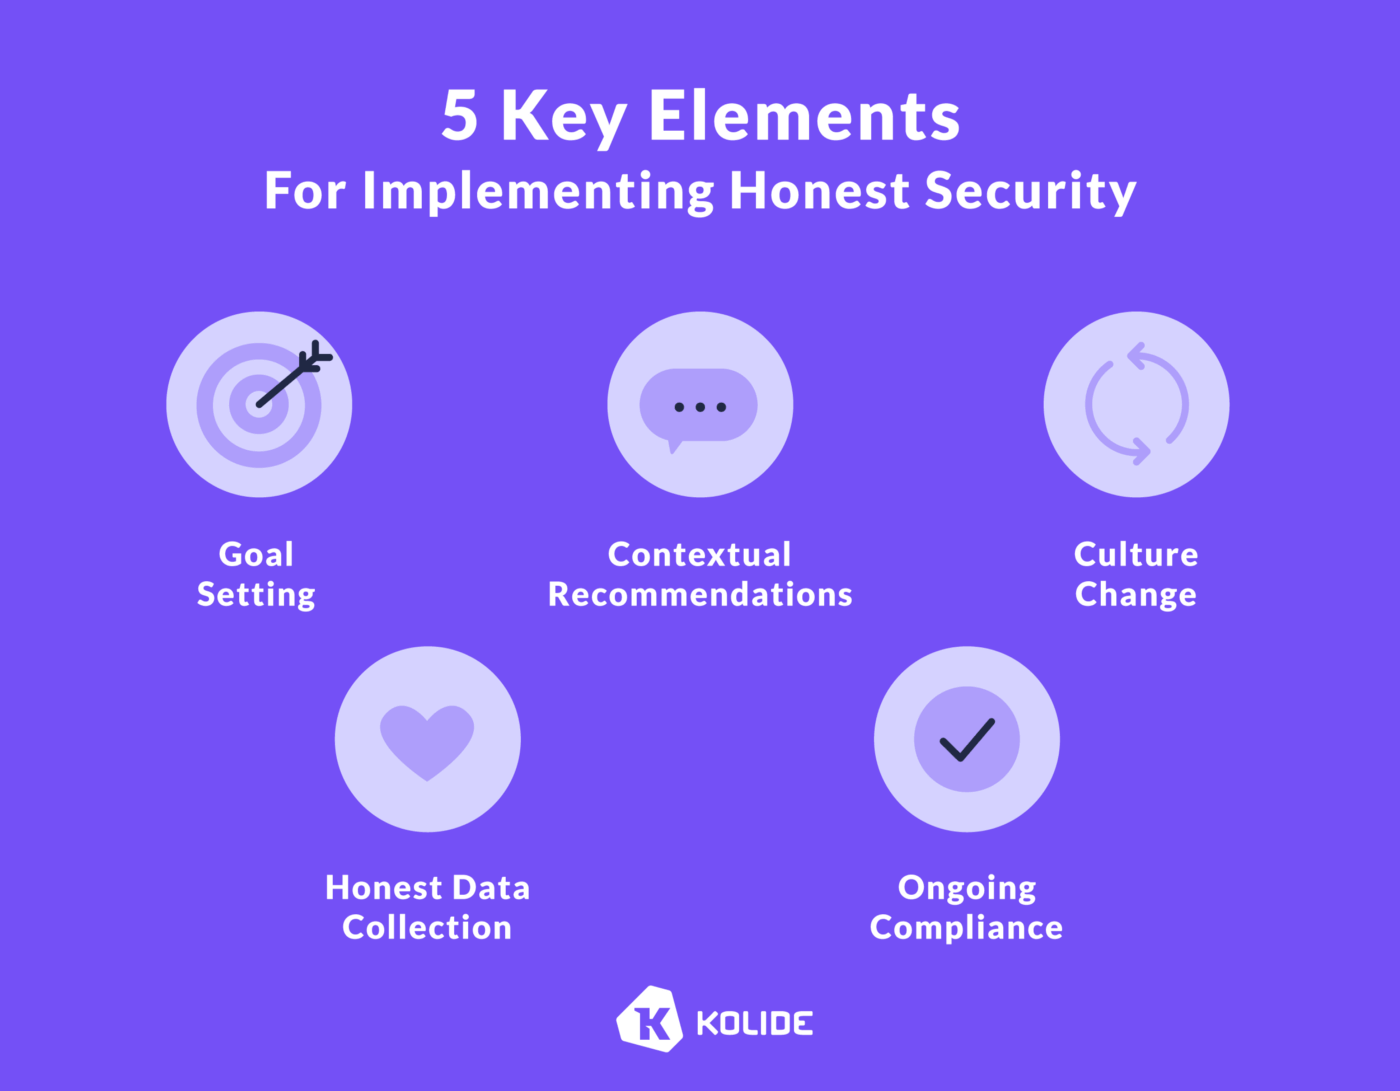 An infographic entitled "5 Key Elements For Implementing Honest Security". The graphic lists the following: goal setting, honest data collection, contextual recommendations, ongoing compliance, and culture change.